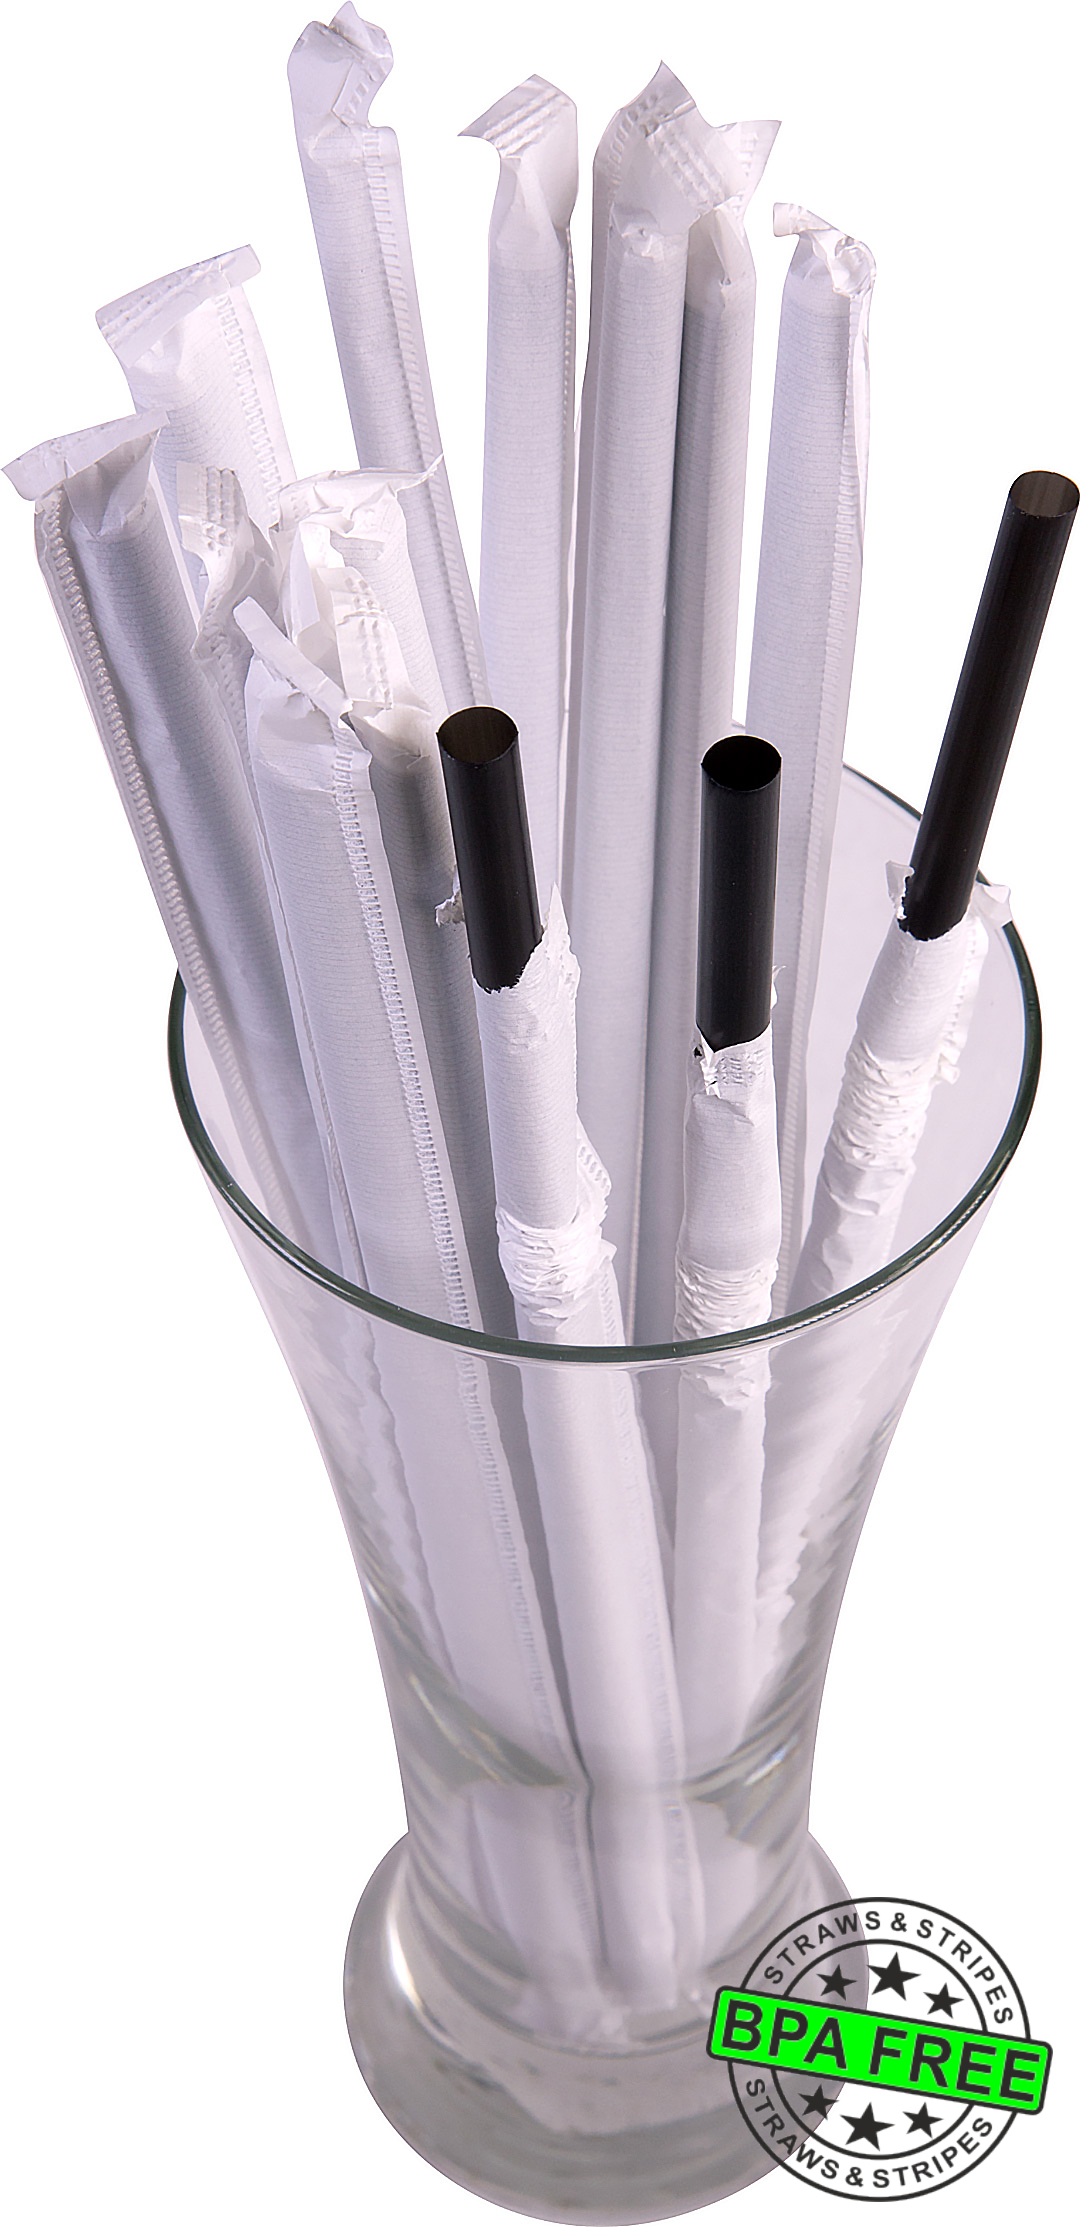 1 CASE - 2,500 (10x250) PAPER WRAPPED SMOOTHIE drinking straws 10 x 0.28 inch - color: black